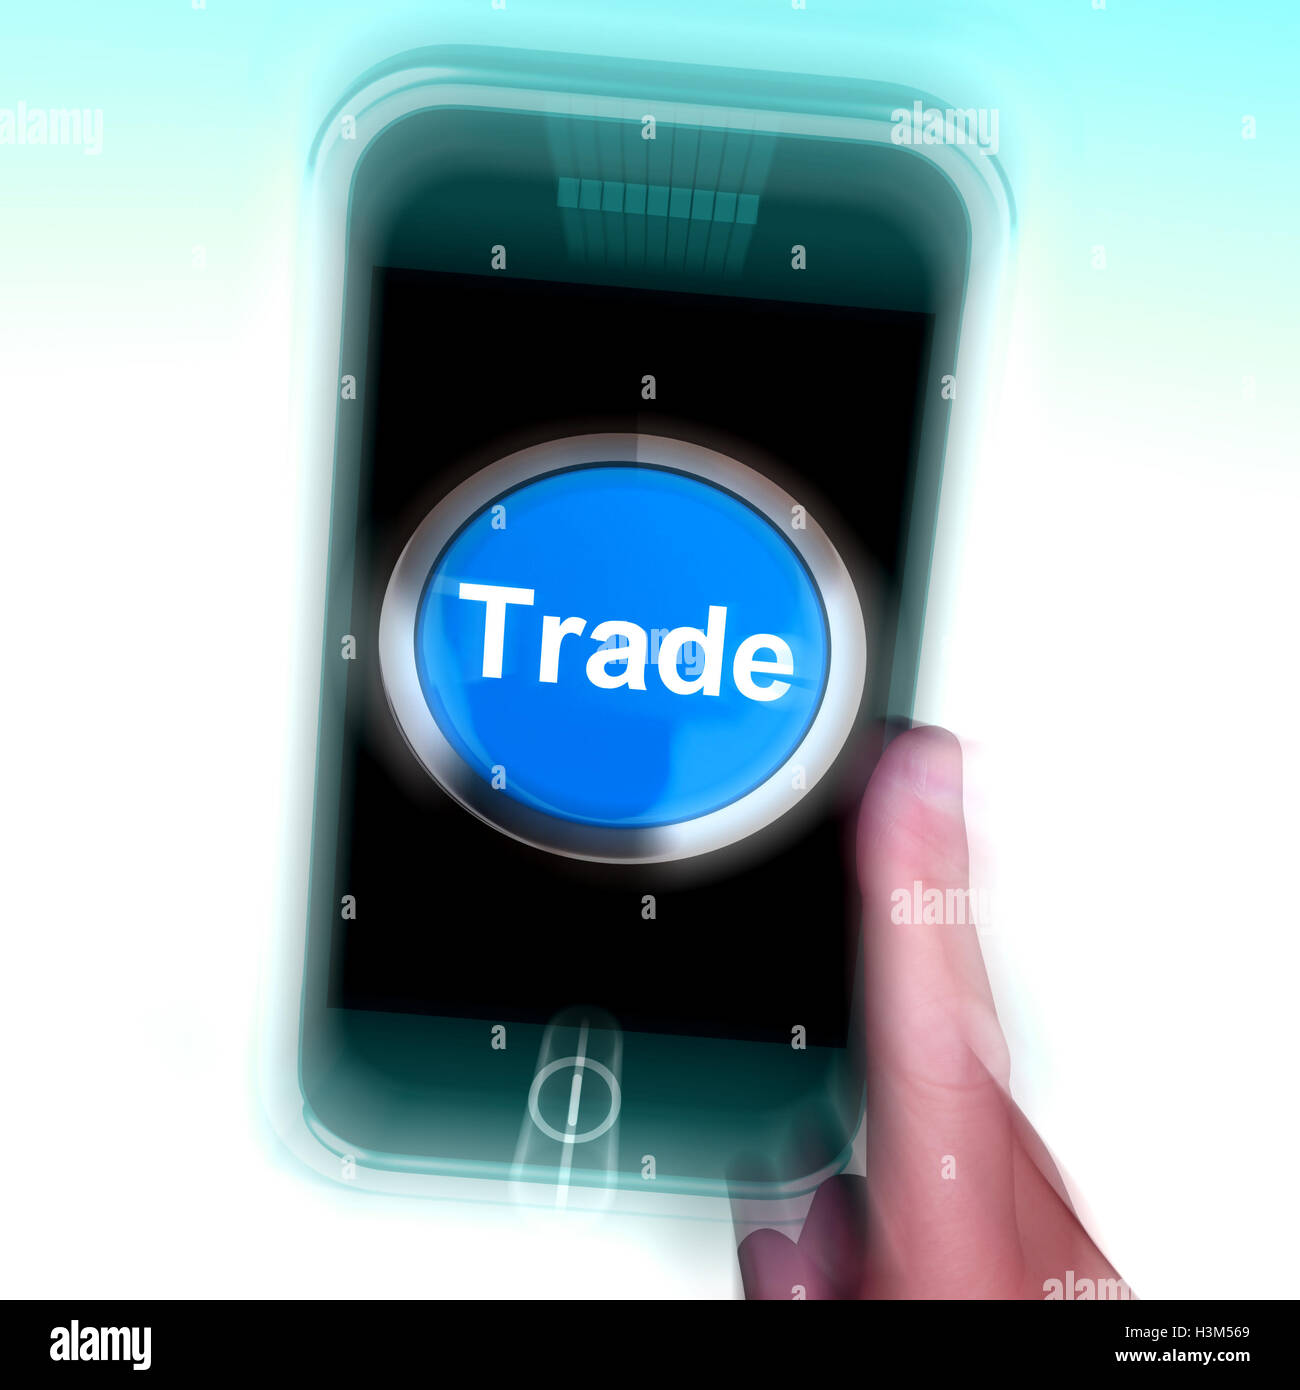 Trade On Mobile Phone Shows Online Buying And Selling Stock Photo